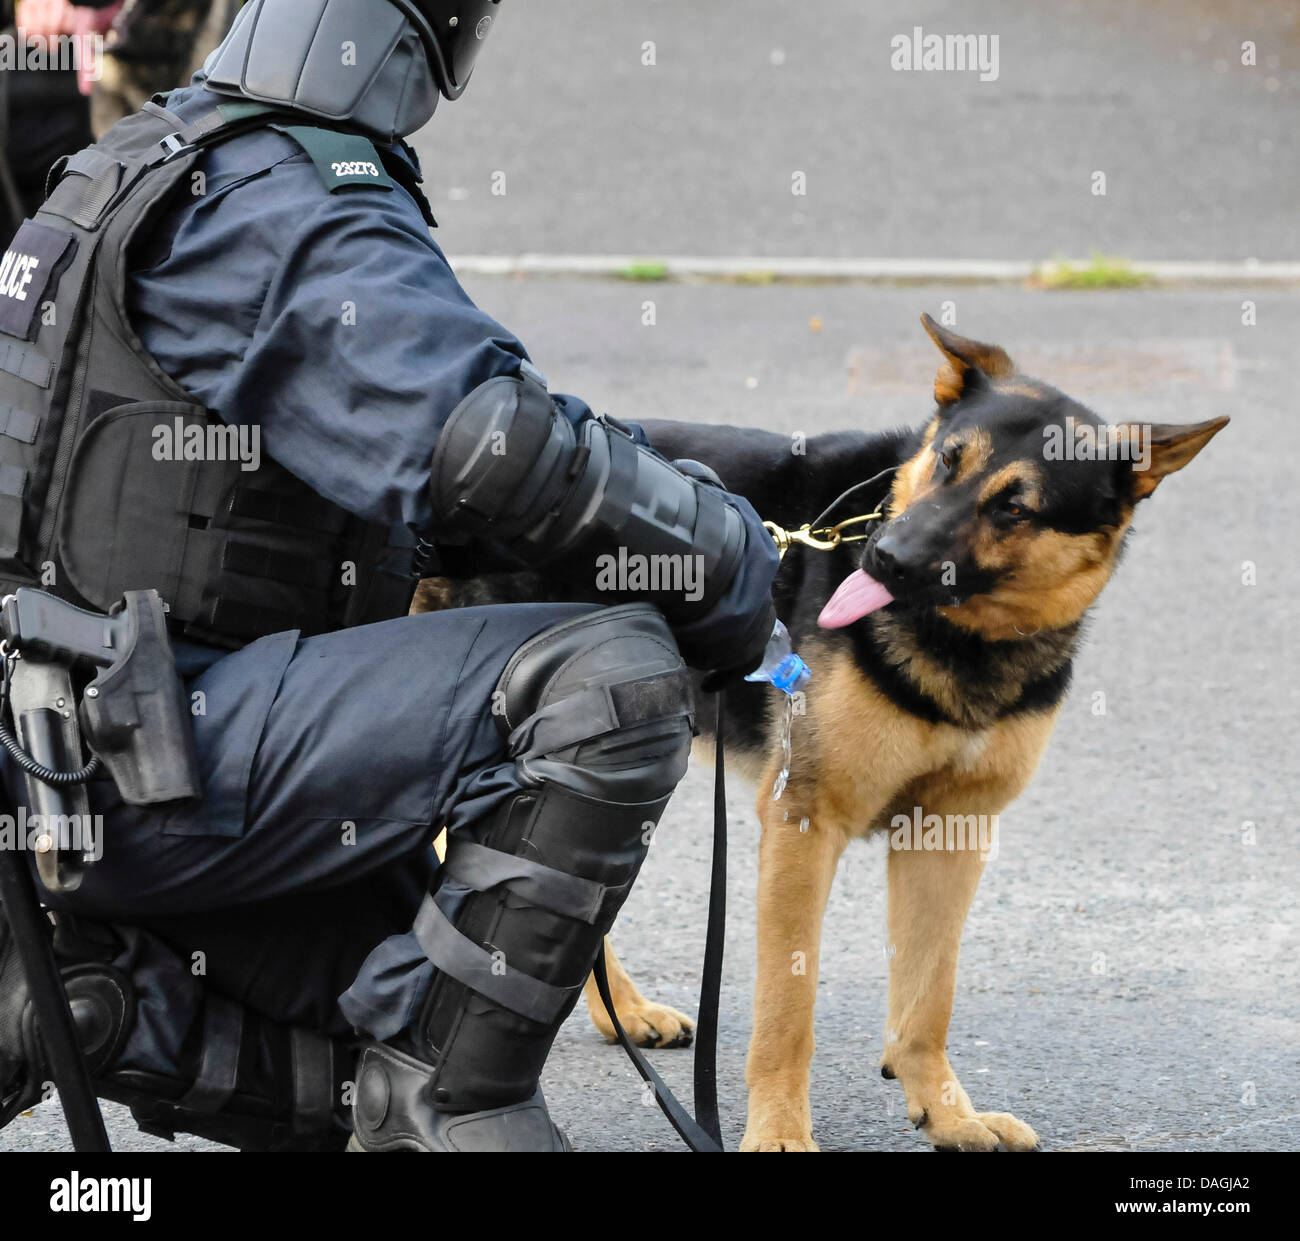 Belfast, Northern Ireland, 12th July 2013 - A Police dog is given water from a plastic bottle during a period of calm at a riot Credit:  Stephen Barnes/Alamy Live News Stock Photo